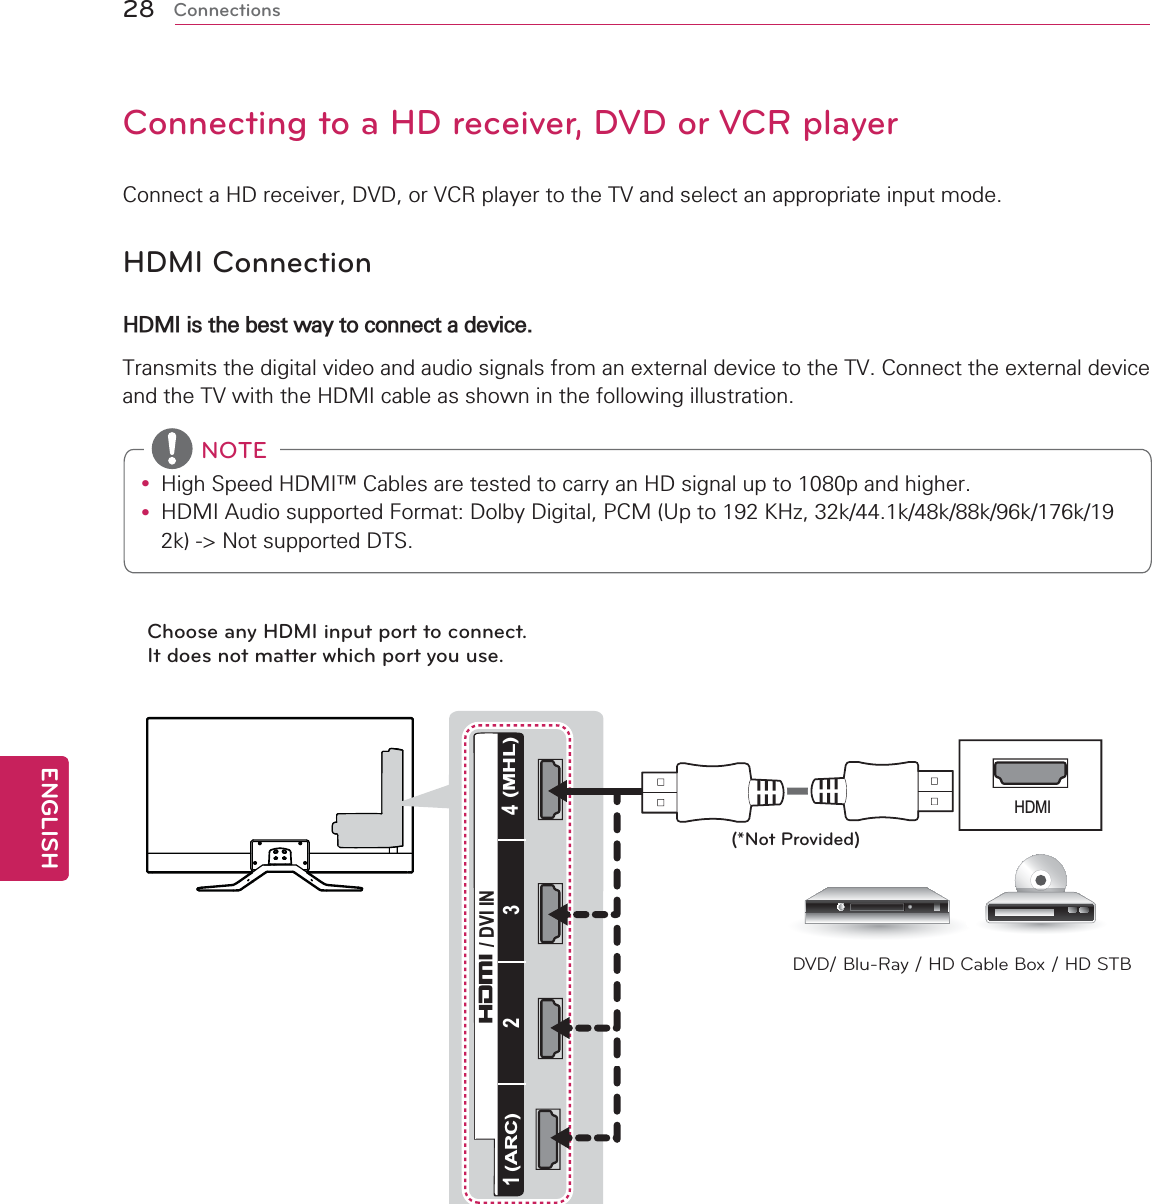 28ENGENGLISHConnectionsConnecting to a HD receiver, DVD or VCR playerConnect a HD receiver, DVD, or VCR player to the TV and select an appropriate input mode.HDMI ConnectionHDMI is the best way to connect a device.Transmits the digital video and audio signals from an external device to the TV. Connect the external device and the TV with the HDMI cable as shown in the following illustration.y High Speed HDMI™ Cables are tested to carry an HD signal up to 1080p and higher.y HDMI Audio supported Format: Dolby Digital, PCM (Up to 192 KHz, 32k/44.1k/48k/88k/96k/176k/192k) -&gt; Not supported DTS.It does not matter which port you use.HDMIDVD/ Blu-Ray / HD Cable Box / HD STBChoose any HDMI input port to connect. (*Not Provided) 2 3 1  4 / DVI IN (ARC)  (MHL)  NOTE